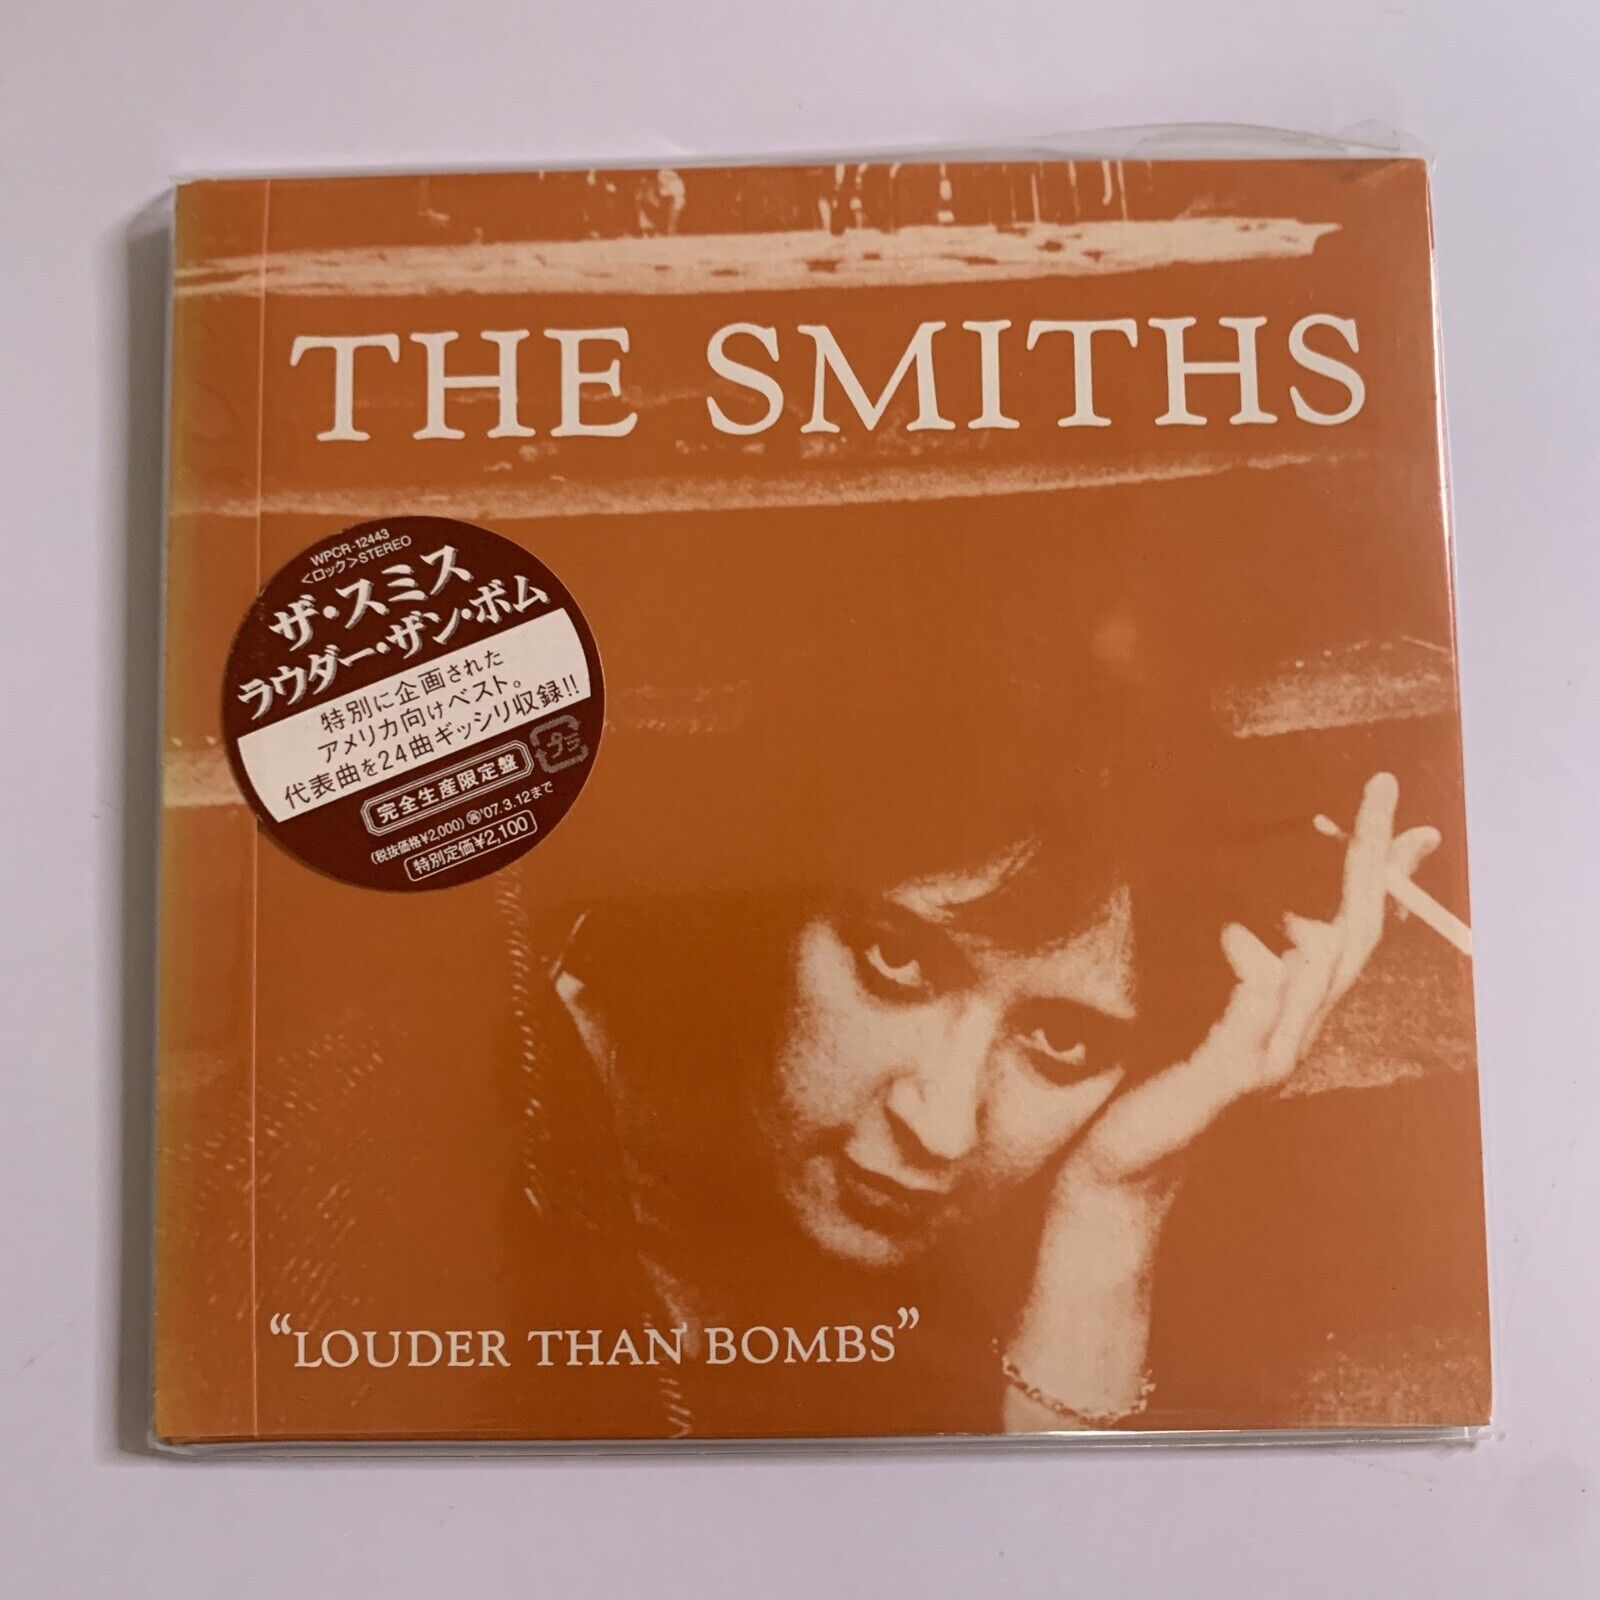 The Smiths – Louder Than Bombs (CD, 2006) Limited Edition Digipak 